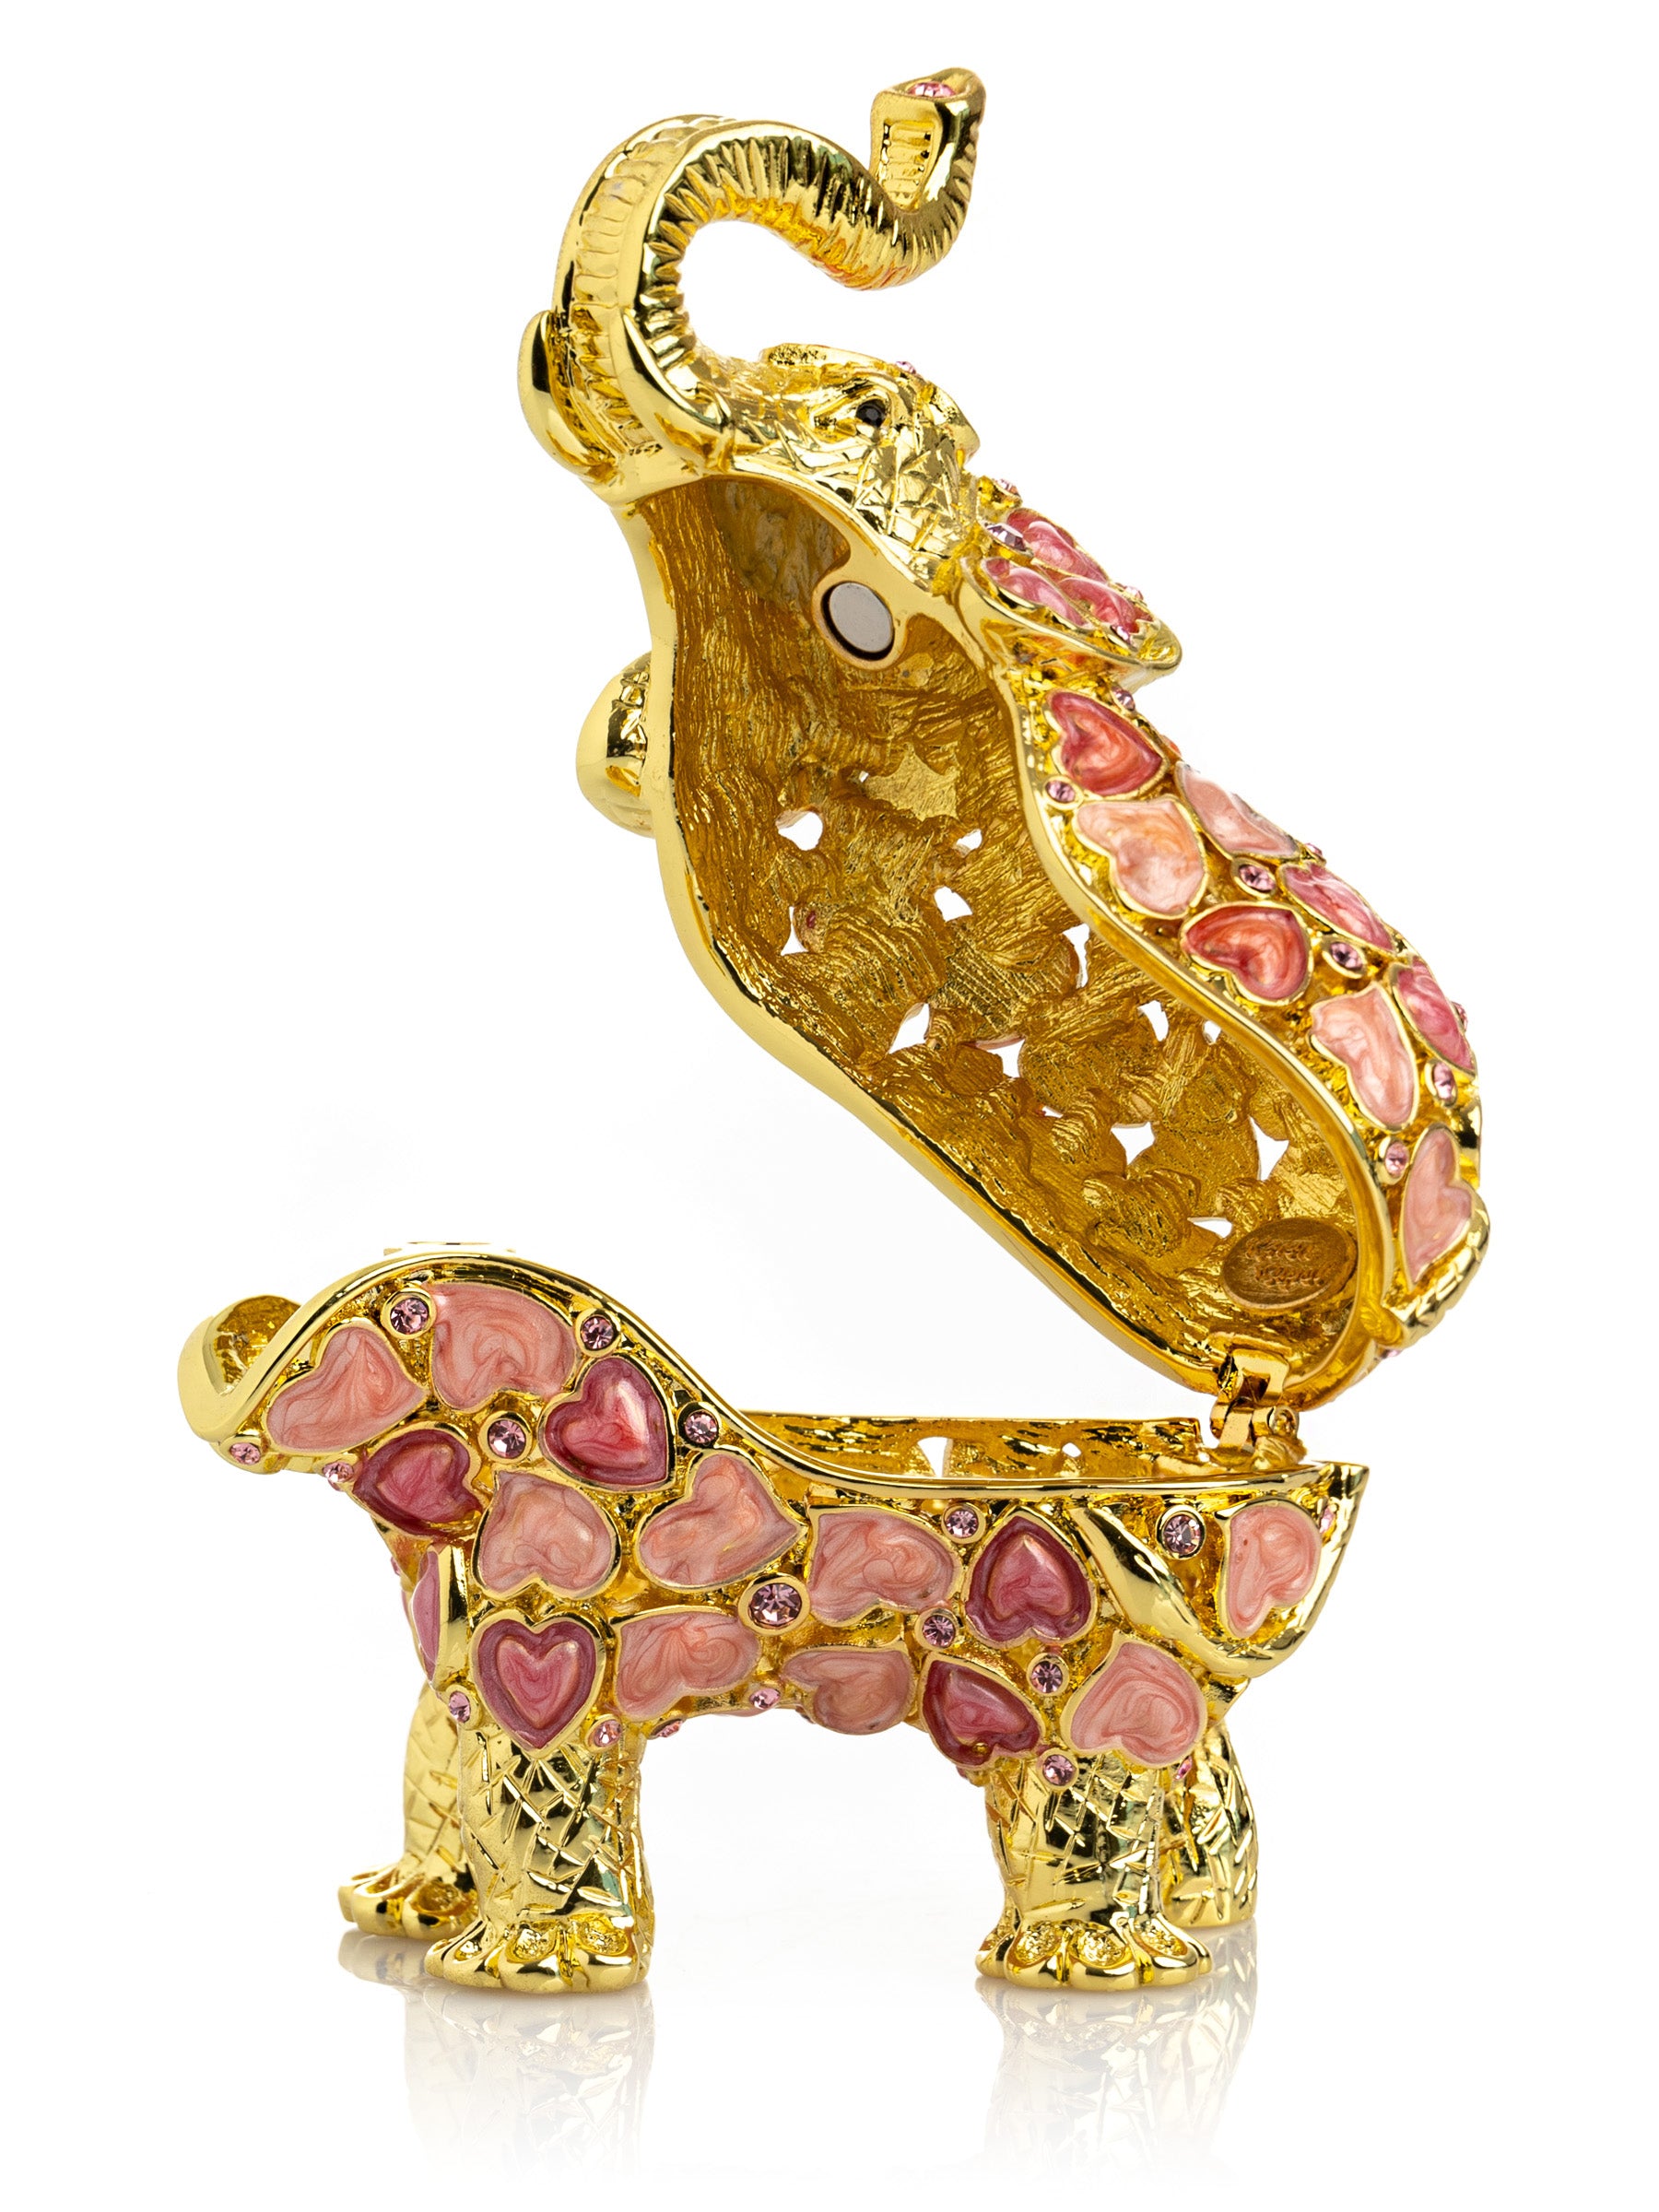 Golden Elephant with Hearts decoration